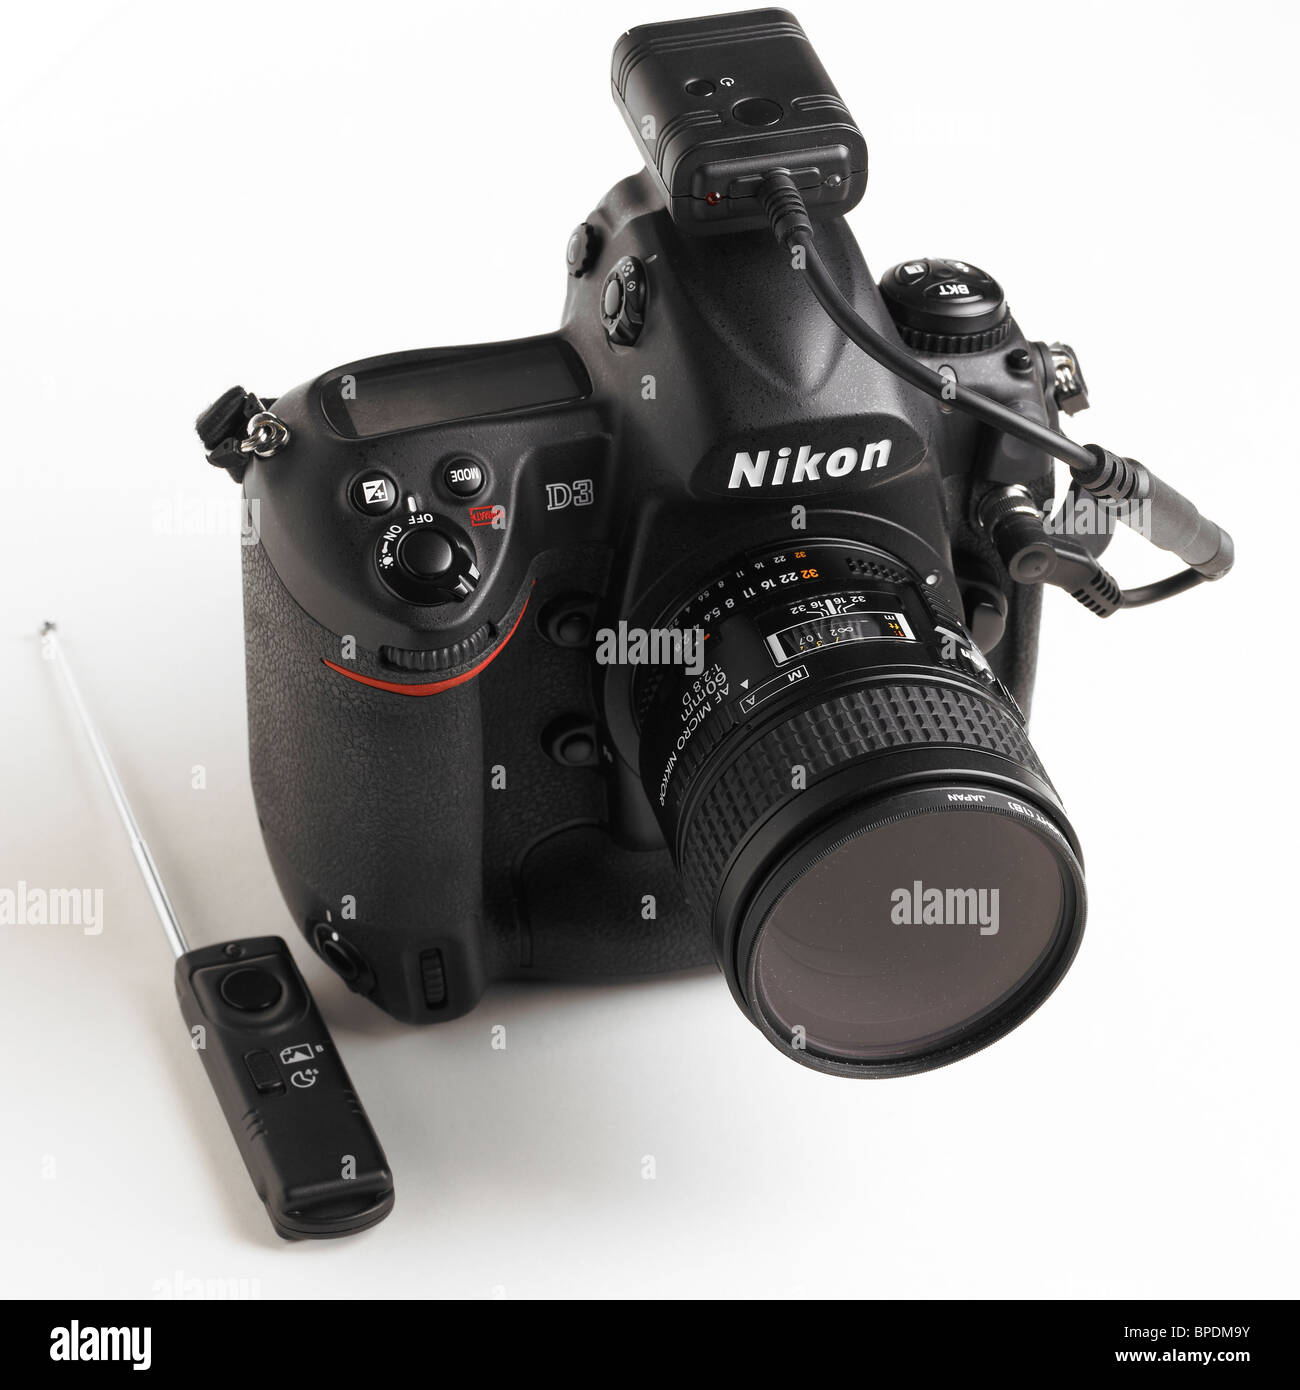 Nikon D3 Camera Fitted With Wireless Infrared Remote Shutter Release On White Background Stock Photo